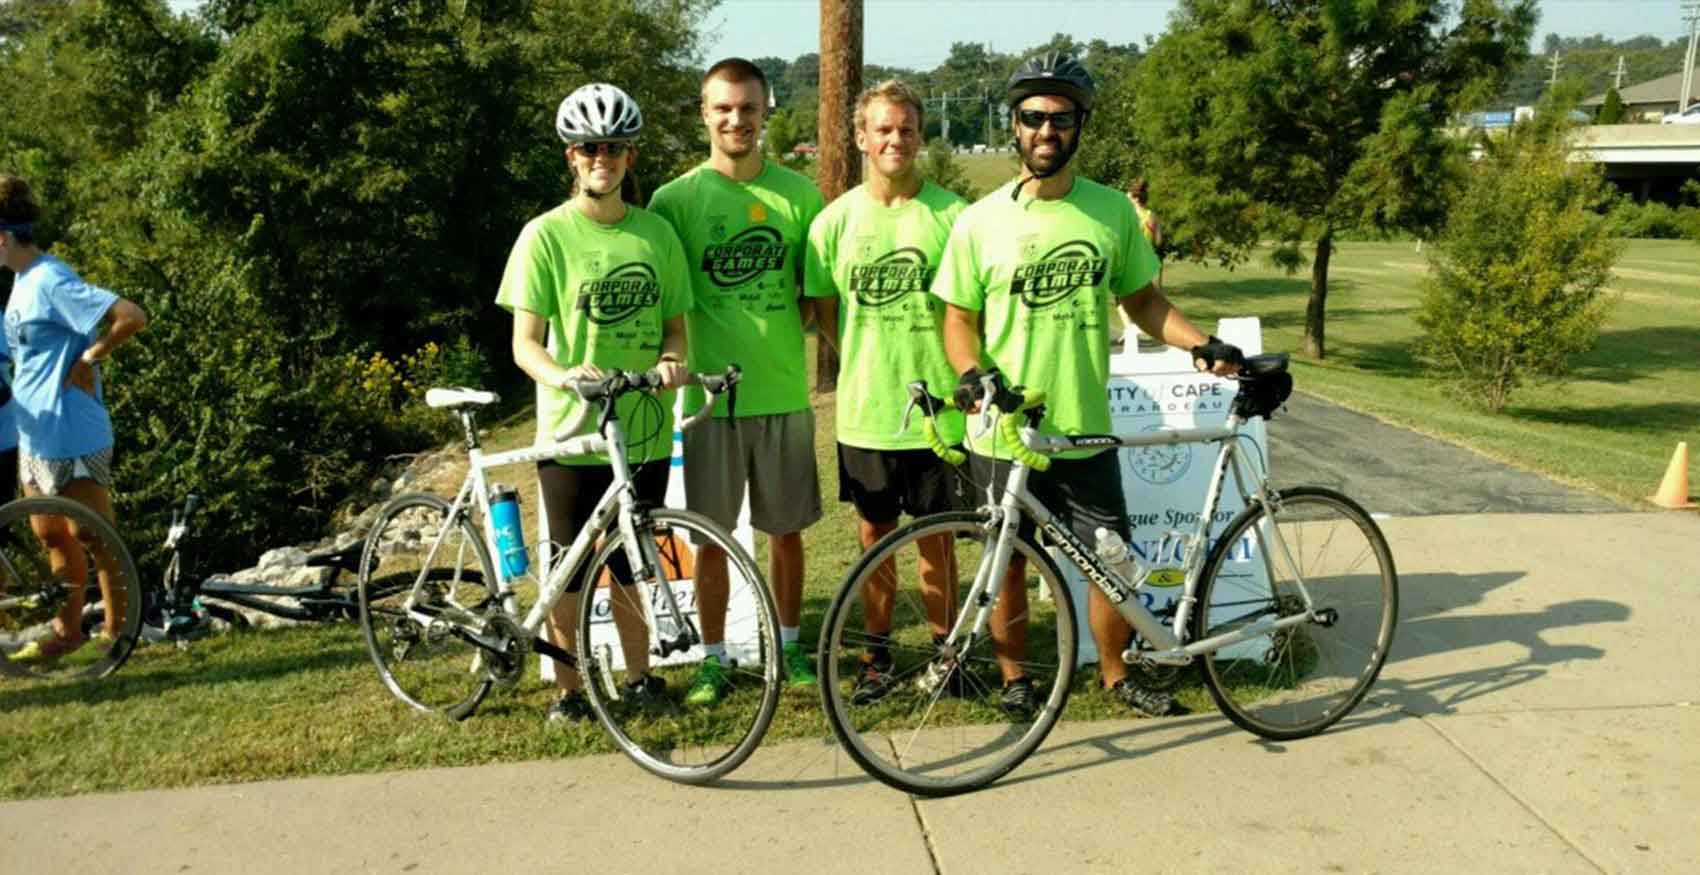 Associates standing next to their bicycles at Corporate Games event